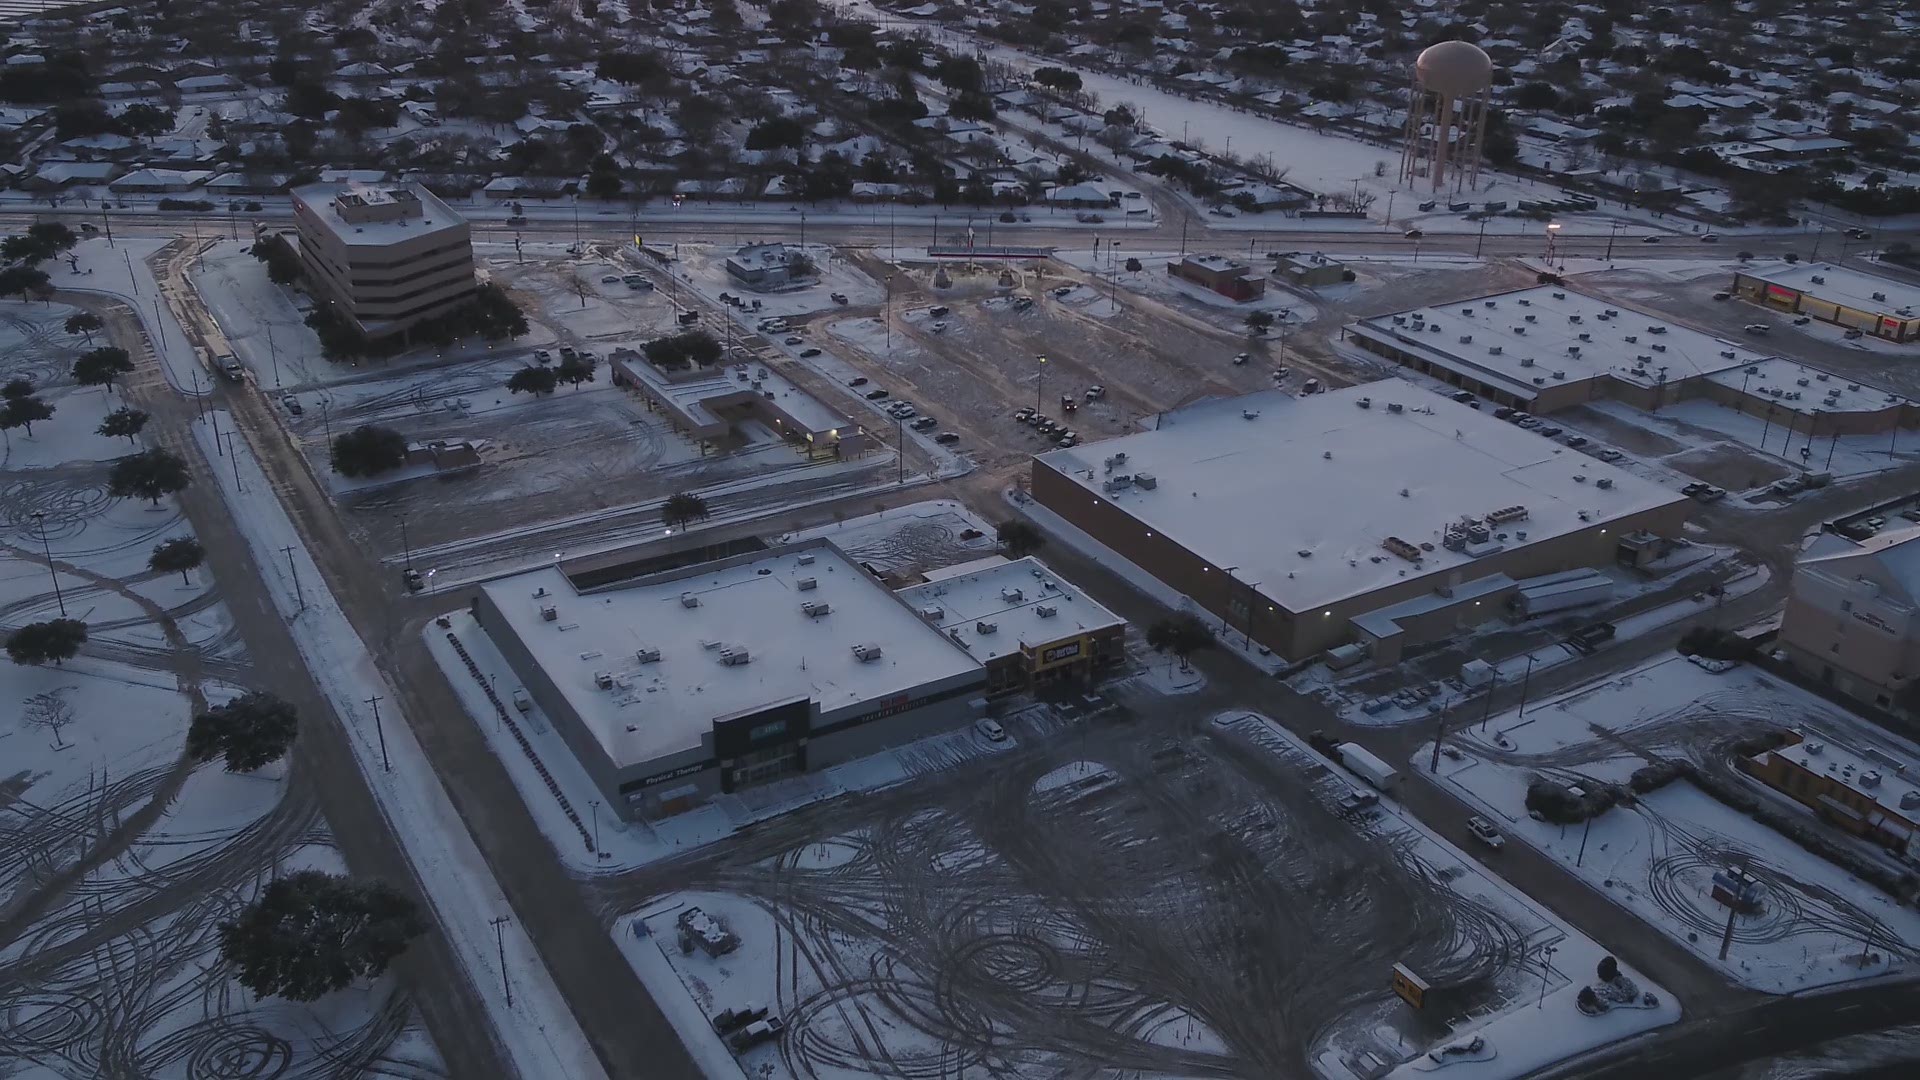 It's Day 2 of winter weather in West Texas. Drone footage shows snow coverage in Abilene.